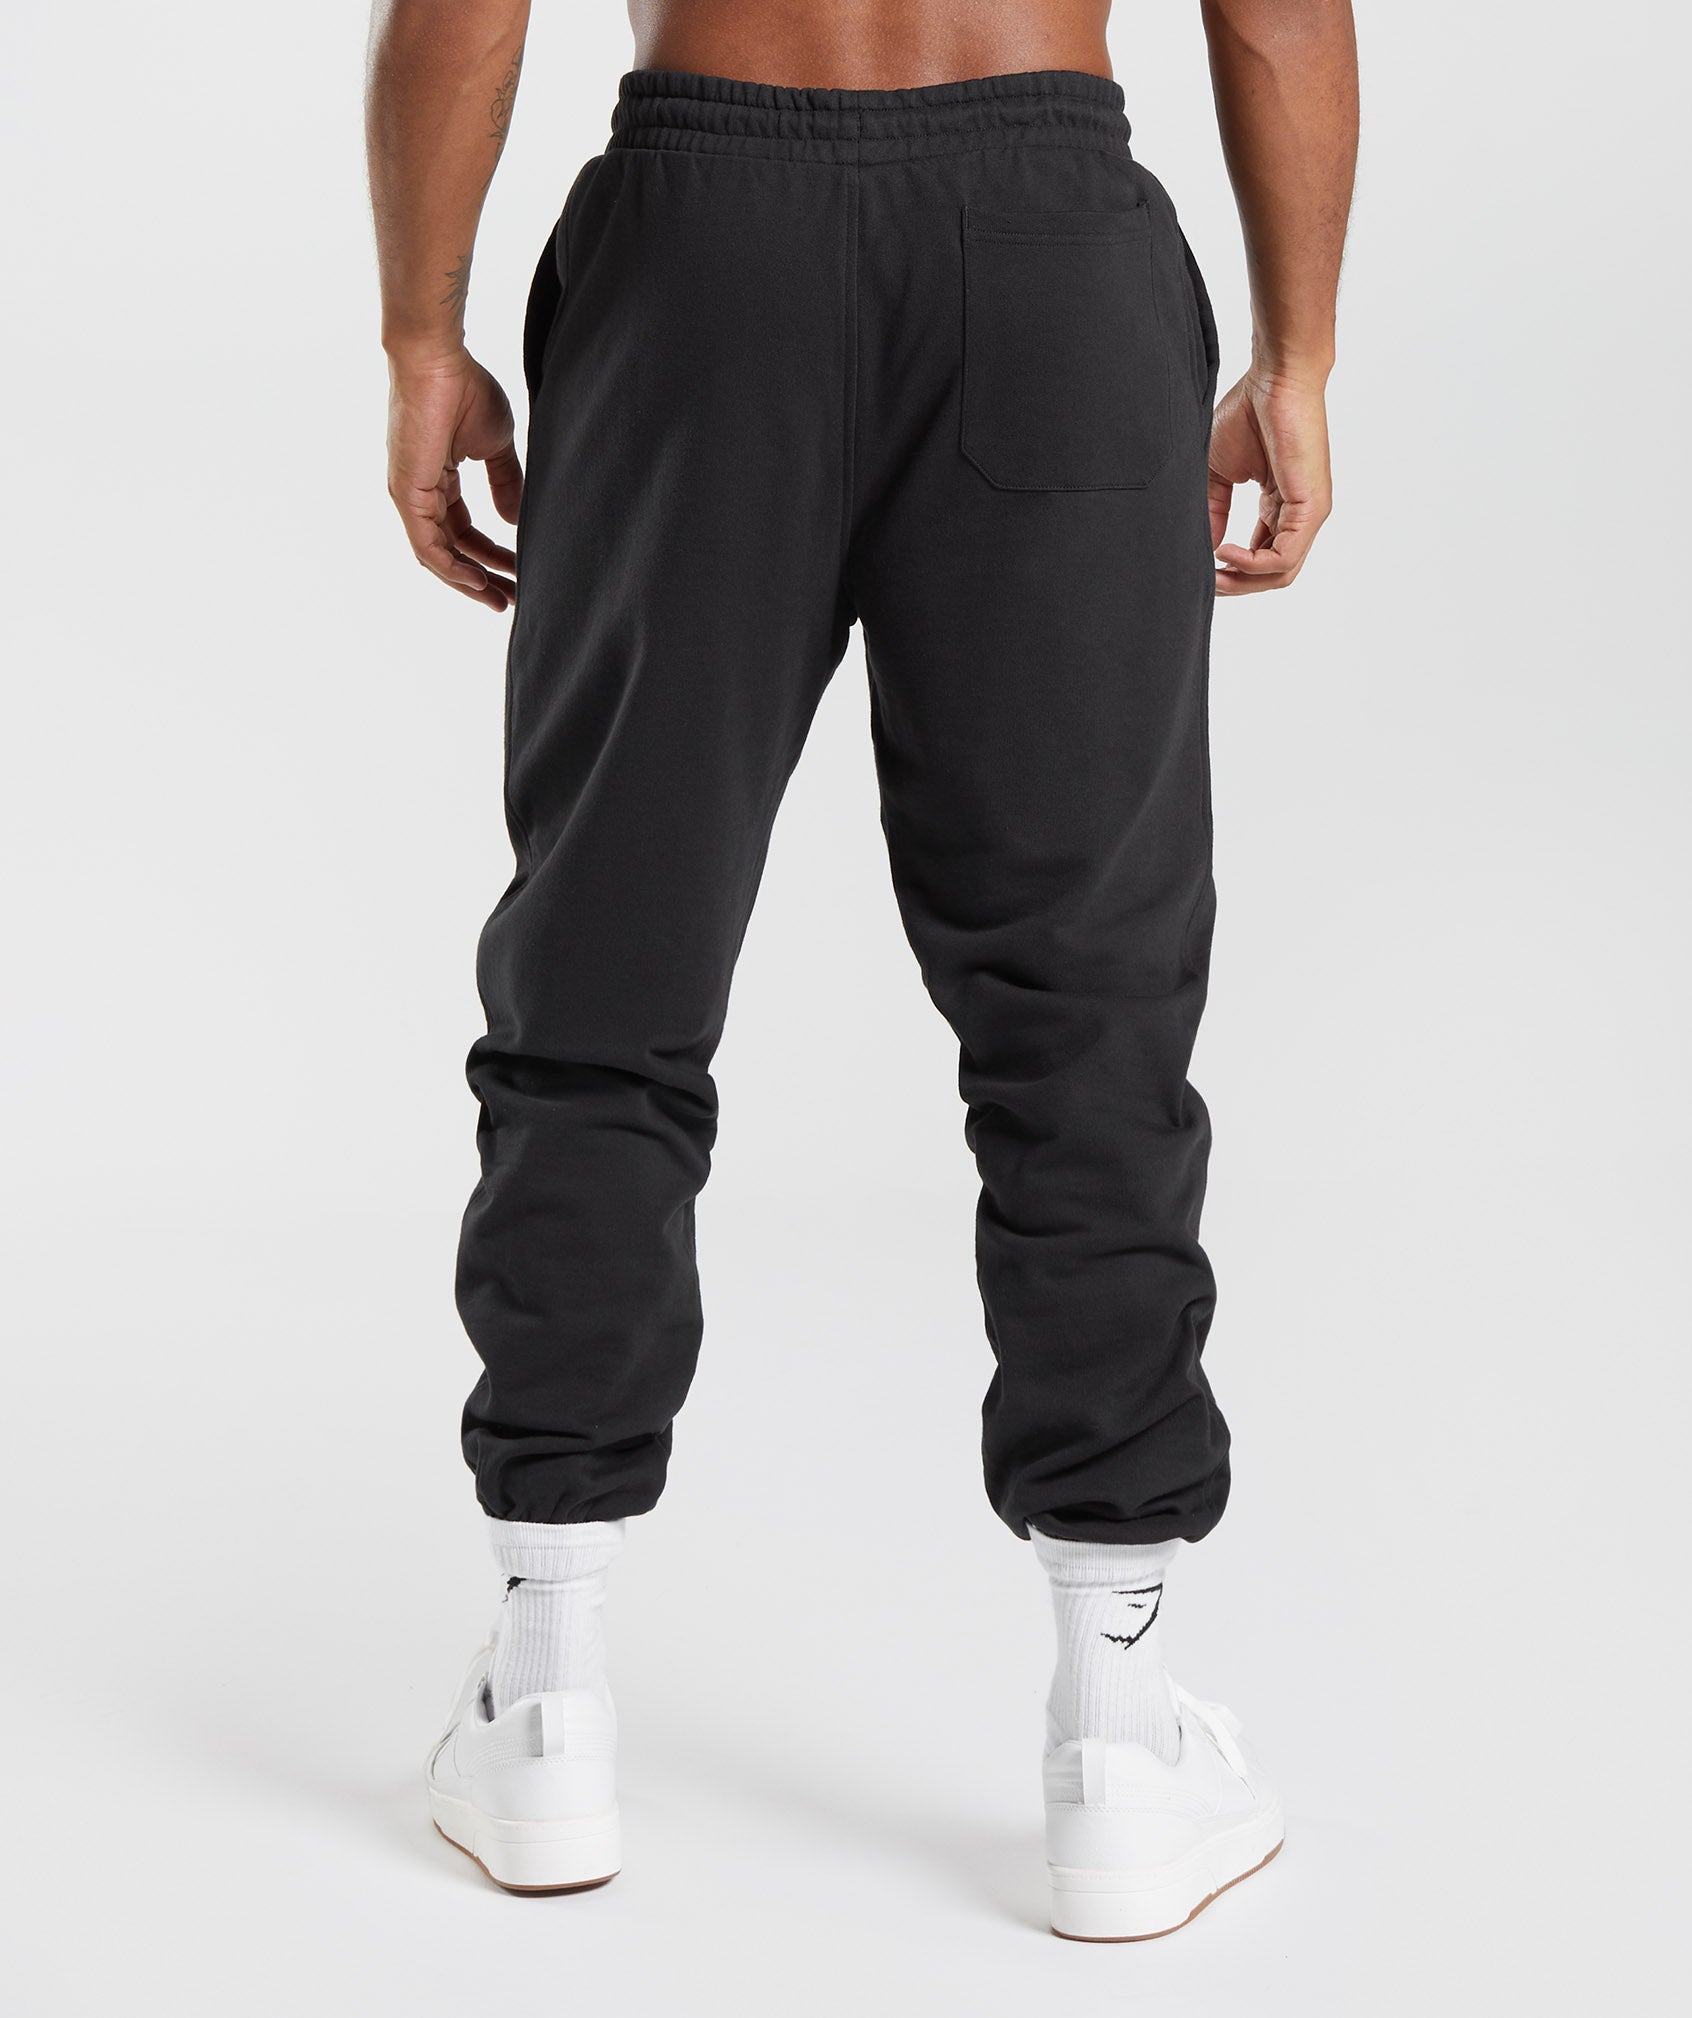 Rest Day Sweats Joggers in Black - view 3